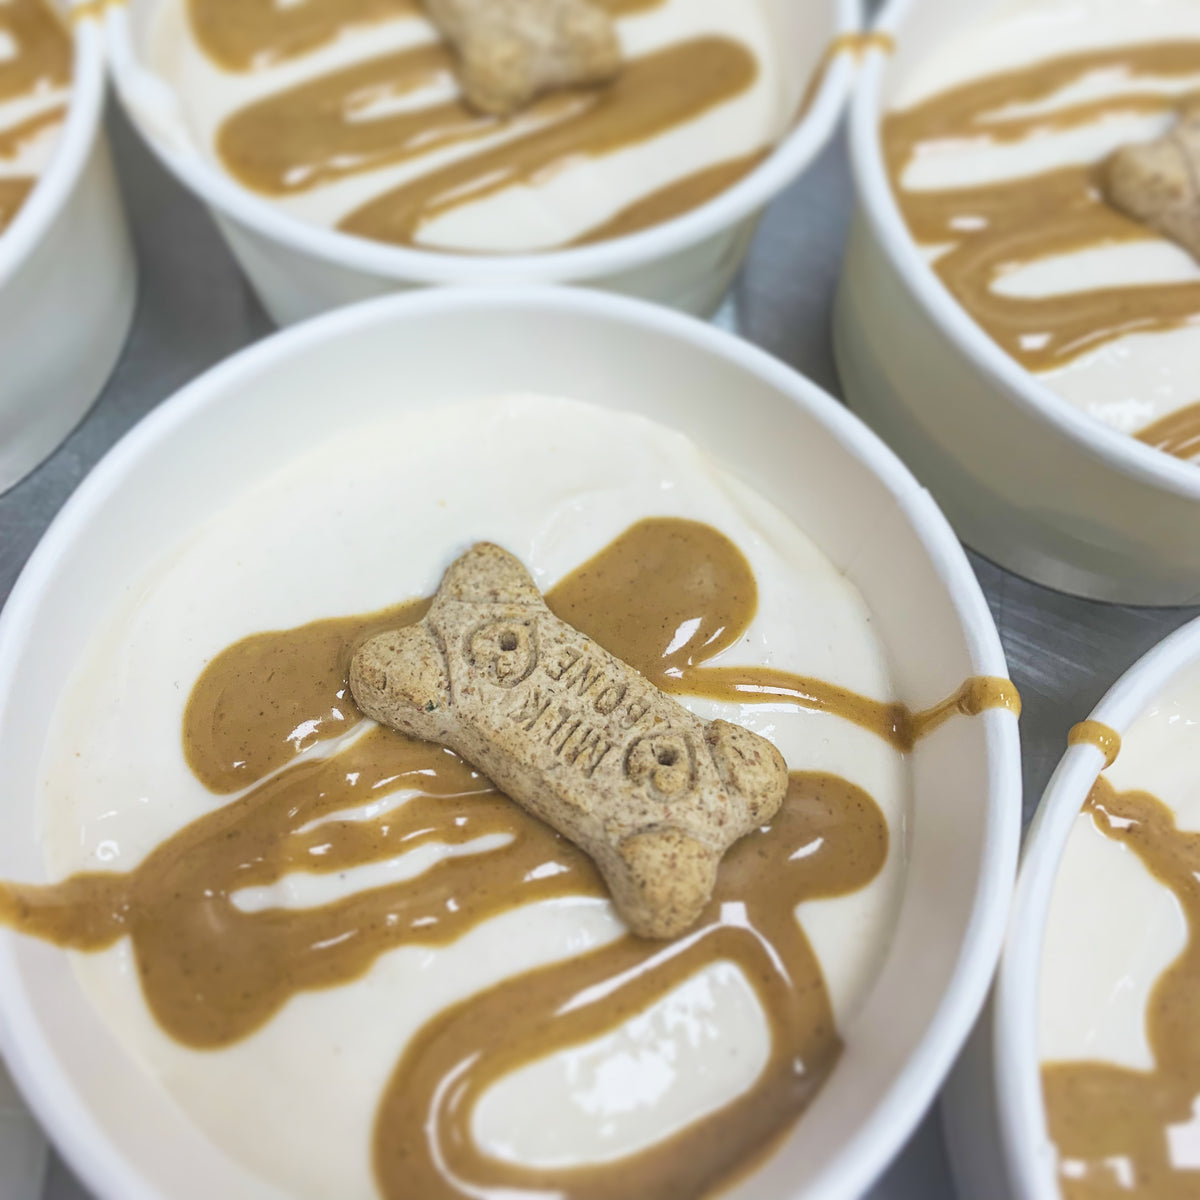 Pup Cup - Doggie Ice Cream – Creamier Handcrafted Ice Cream and Coffee